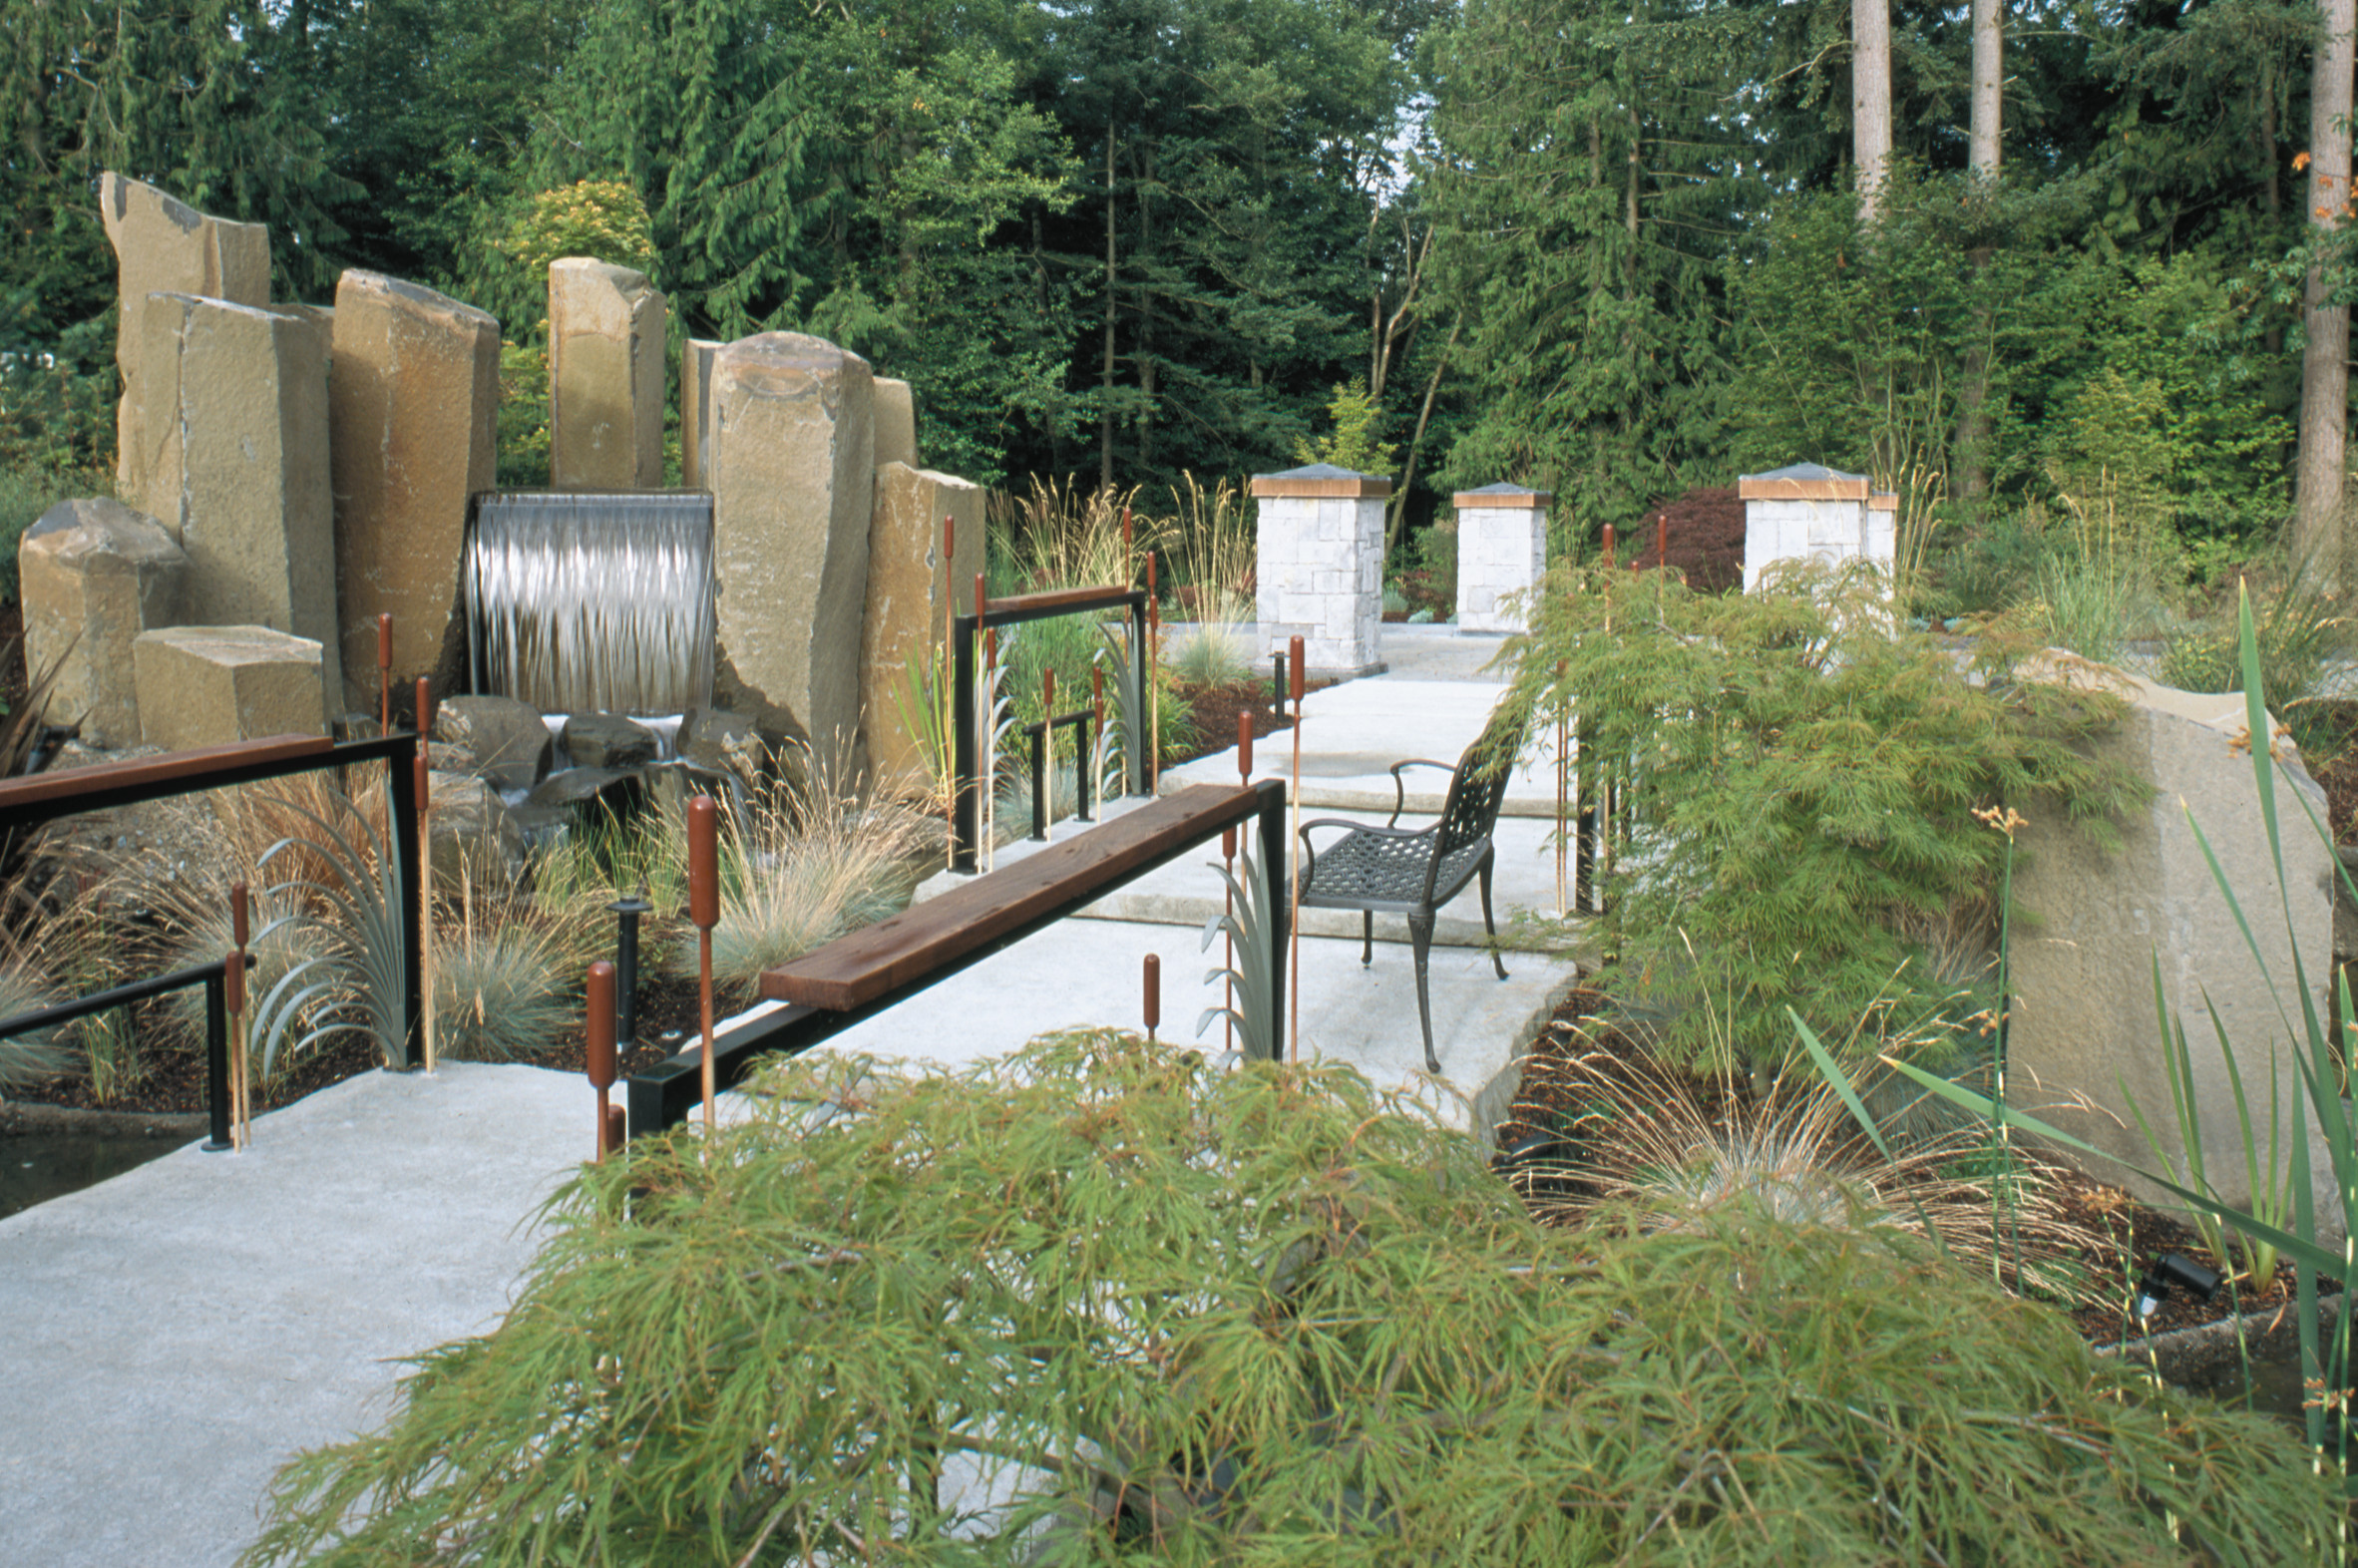 Entry water feature: inspired by Eastern Washington Basalt calderas